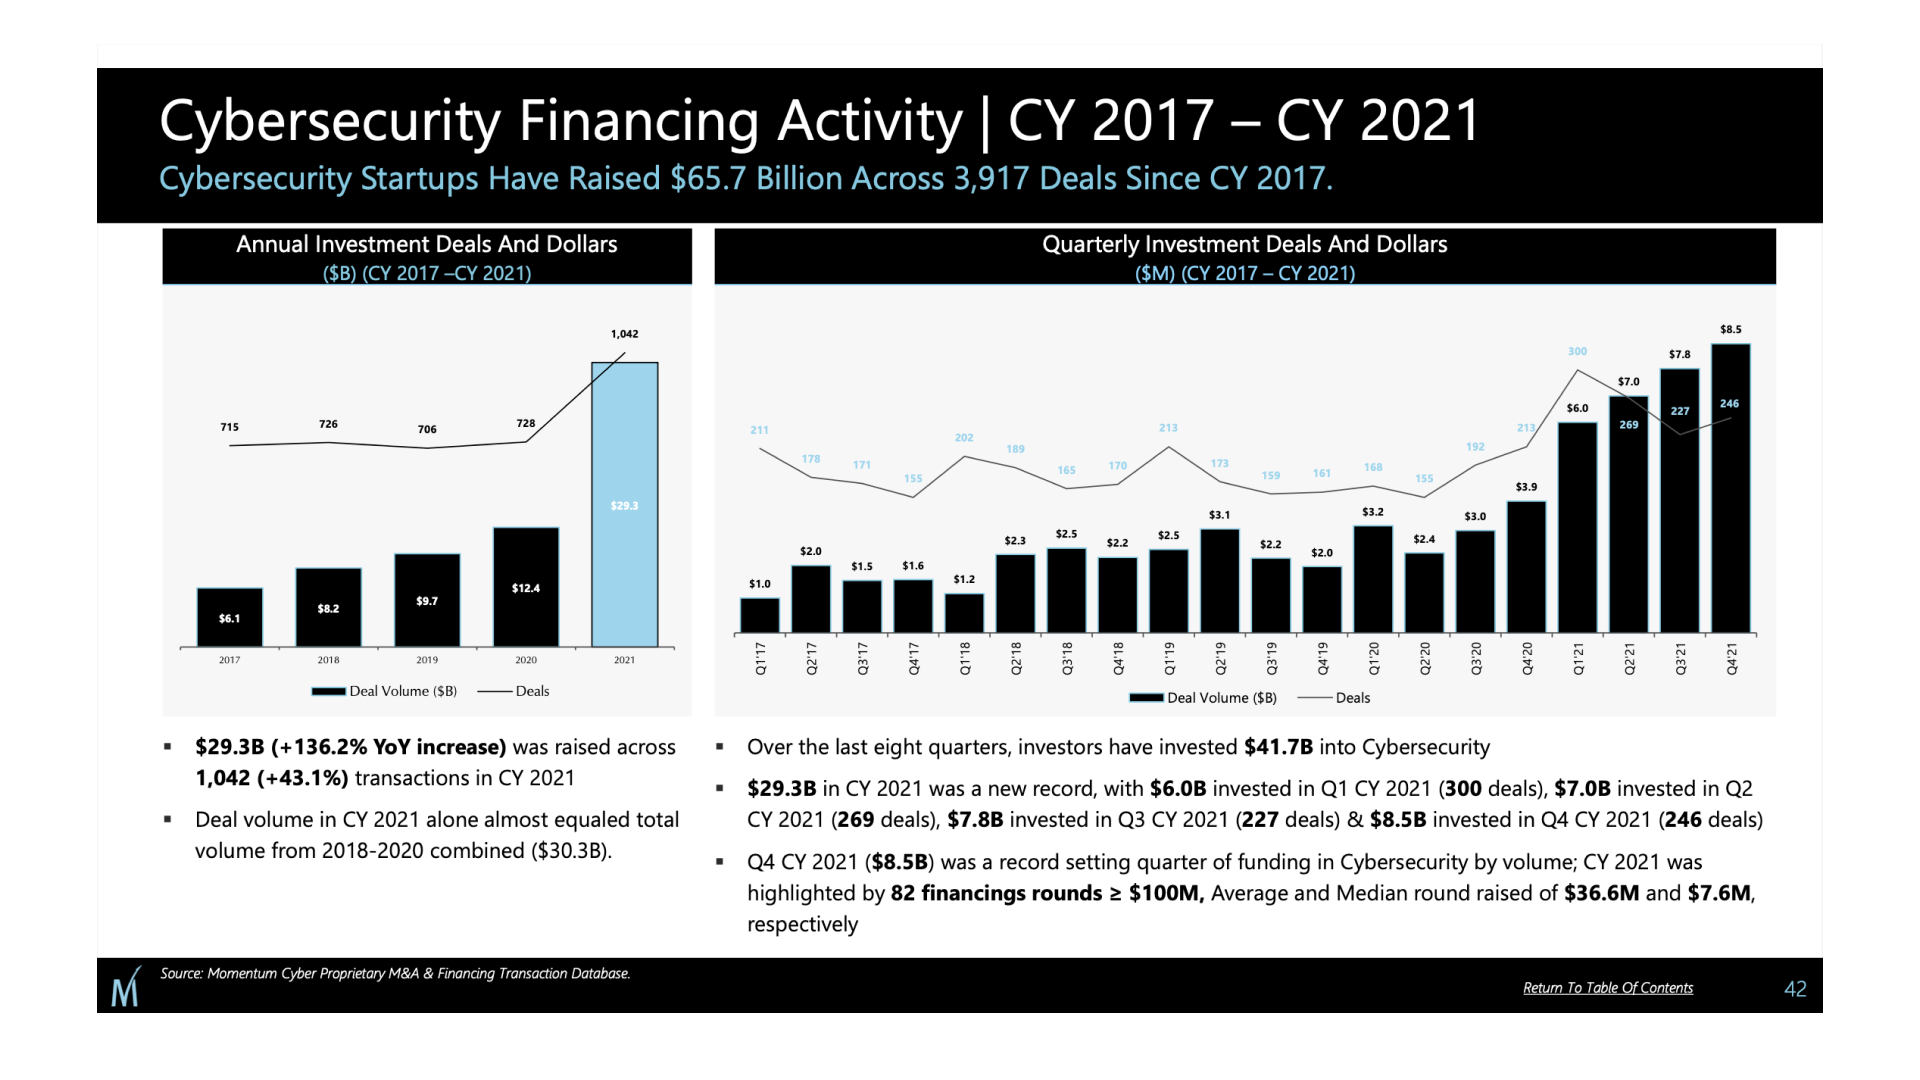 Cybersecurity financing activity trends from 2017 to 2021.